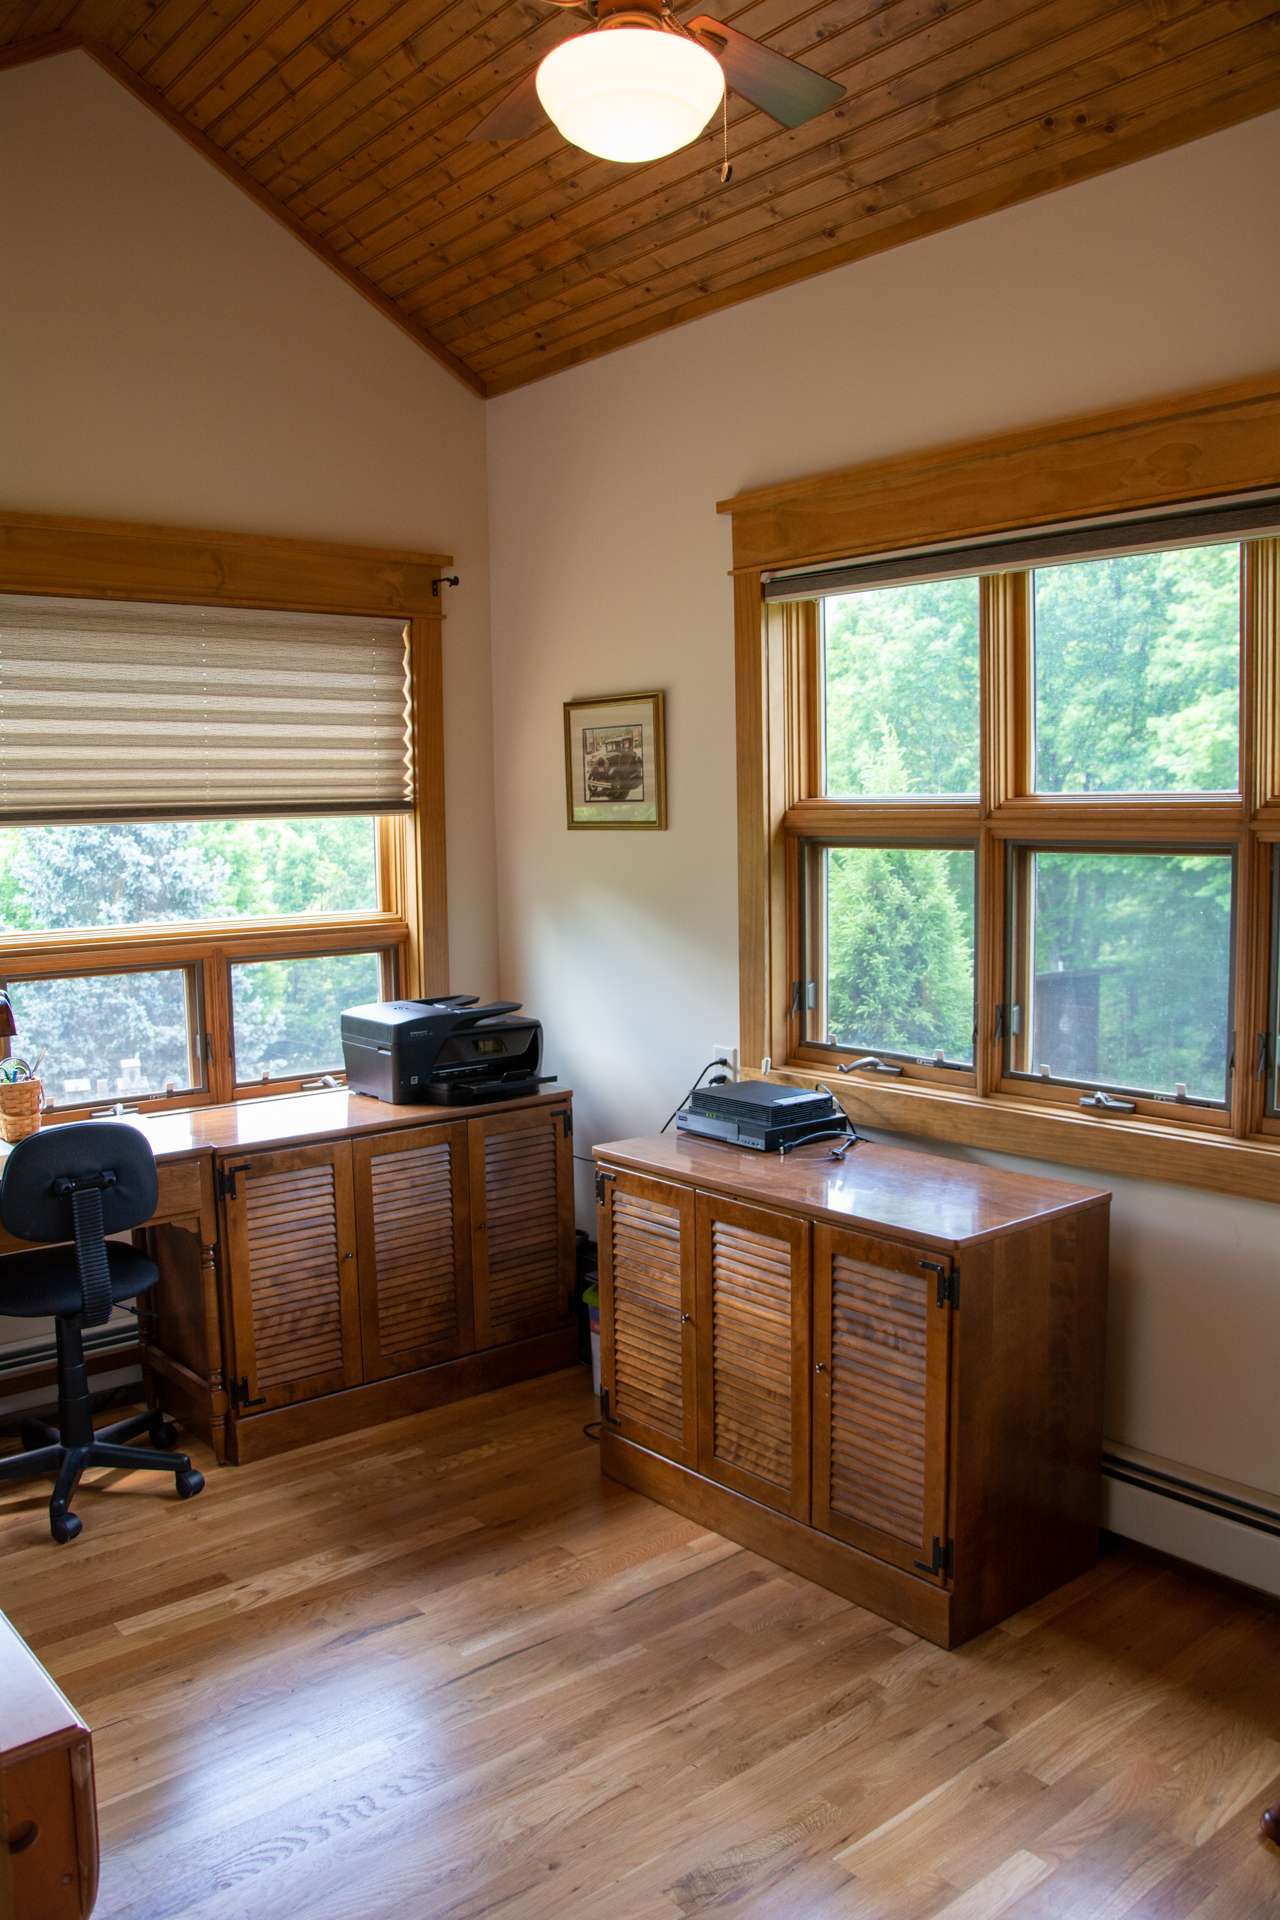 The office is spacious with lots of windows overlooking the gardens and pond.